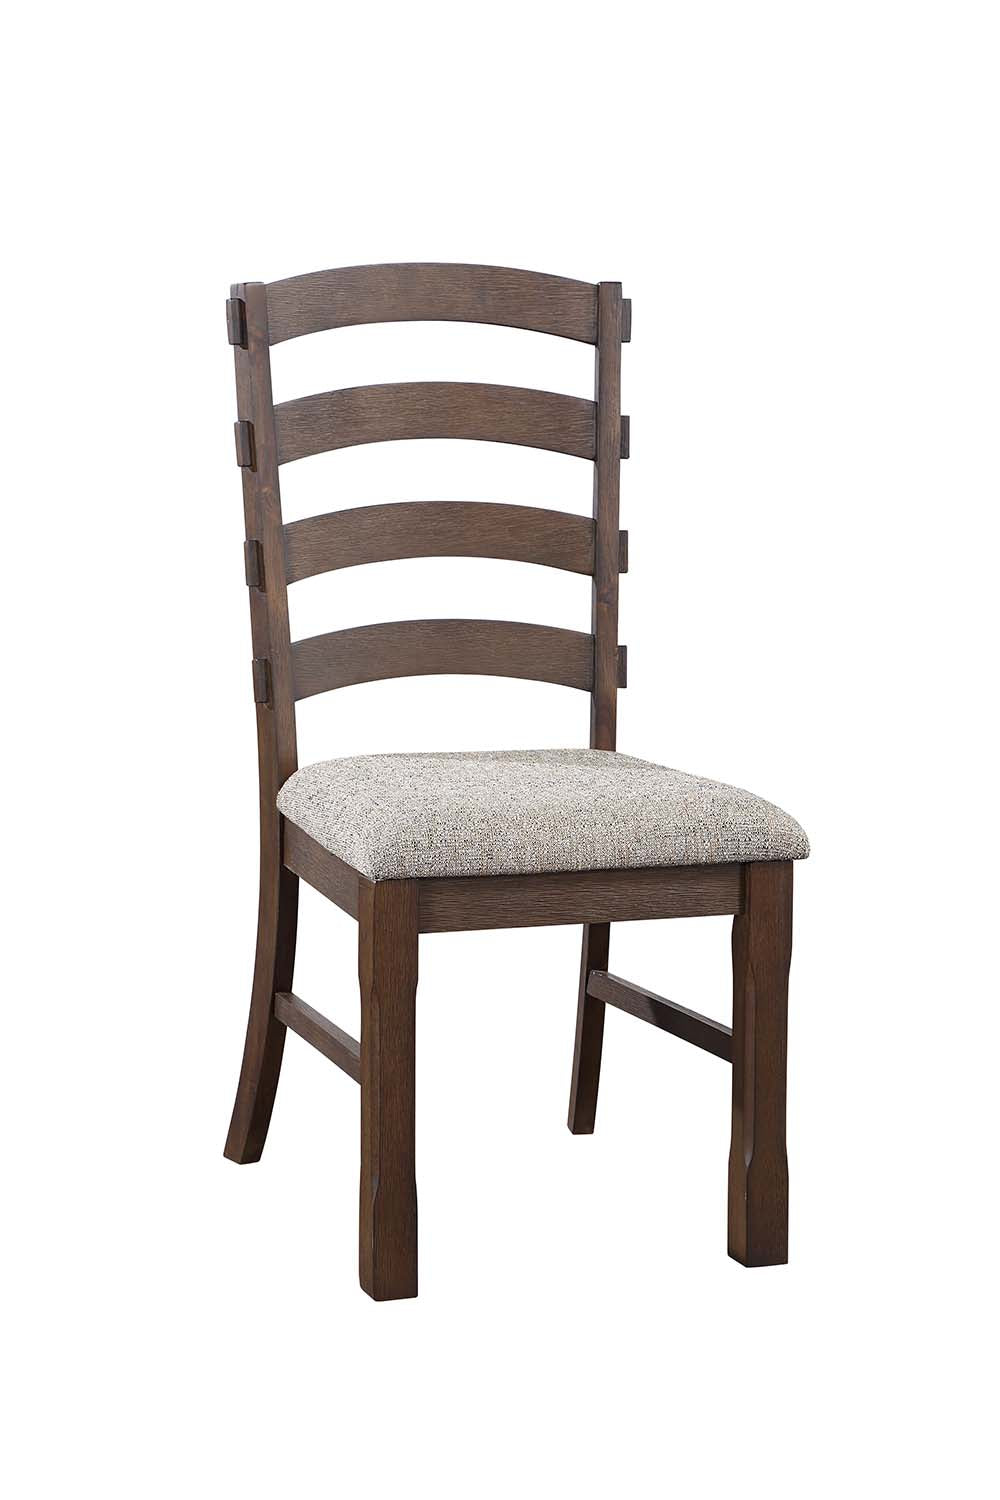 ACME Dining Chairs - ACME Pascaline Side Chair (Set-2), Gray Fabric, Rustic Brown & Oak Finish